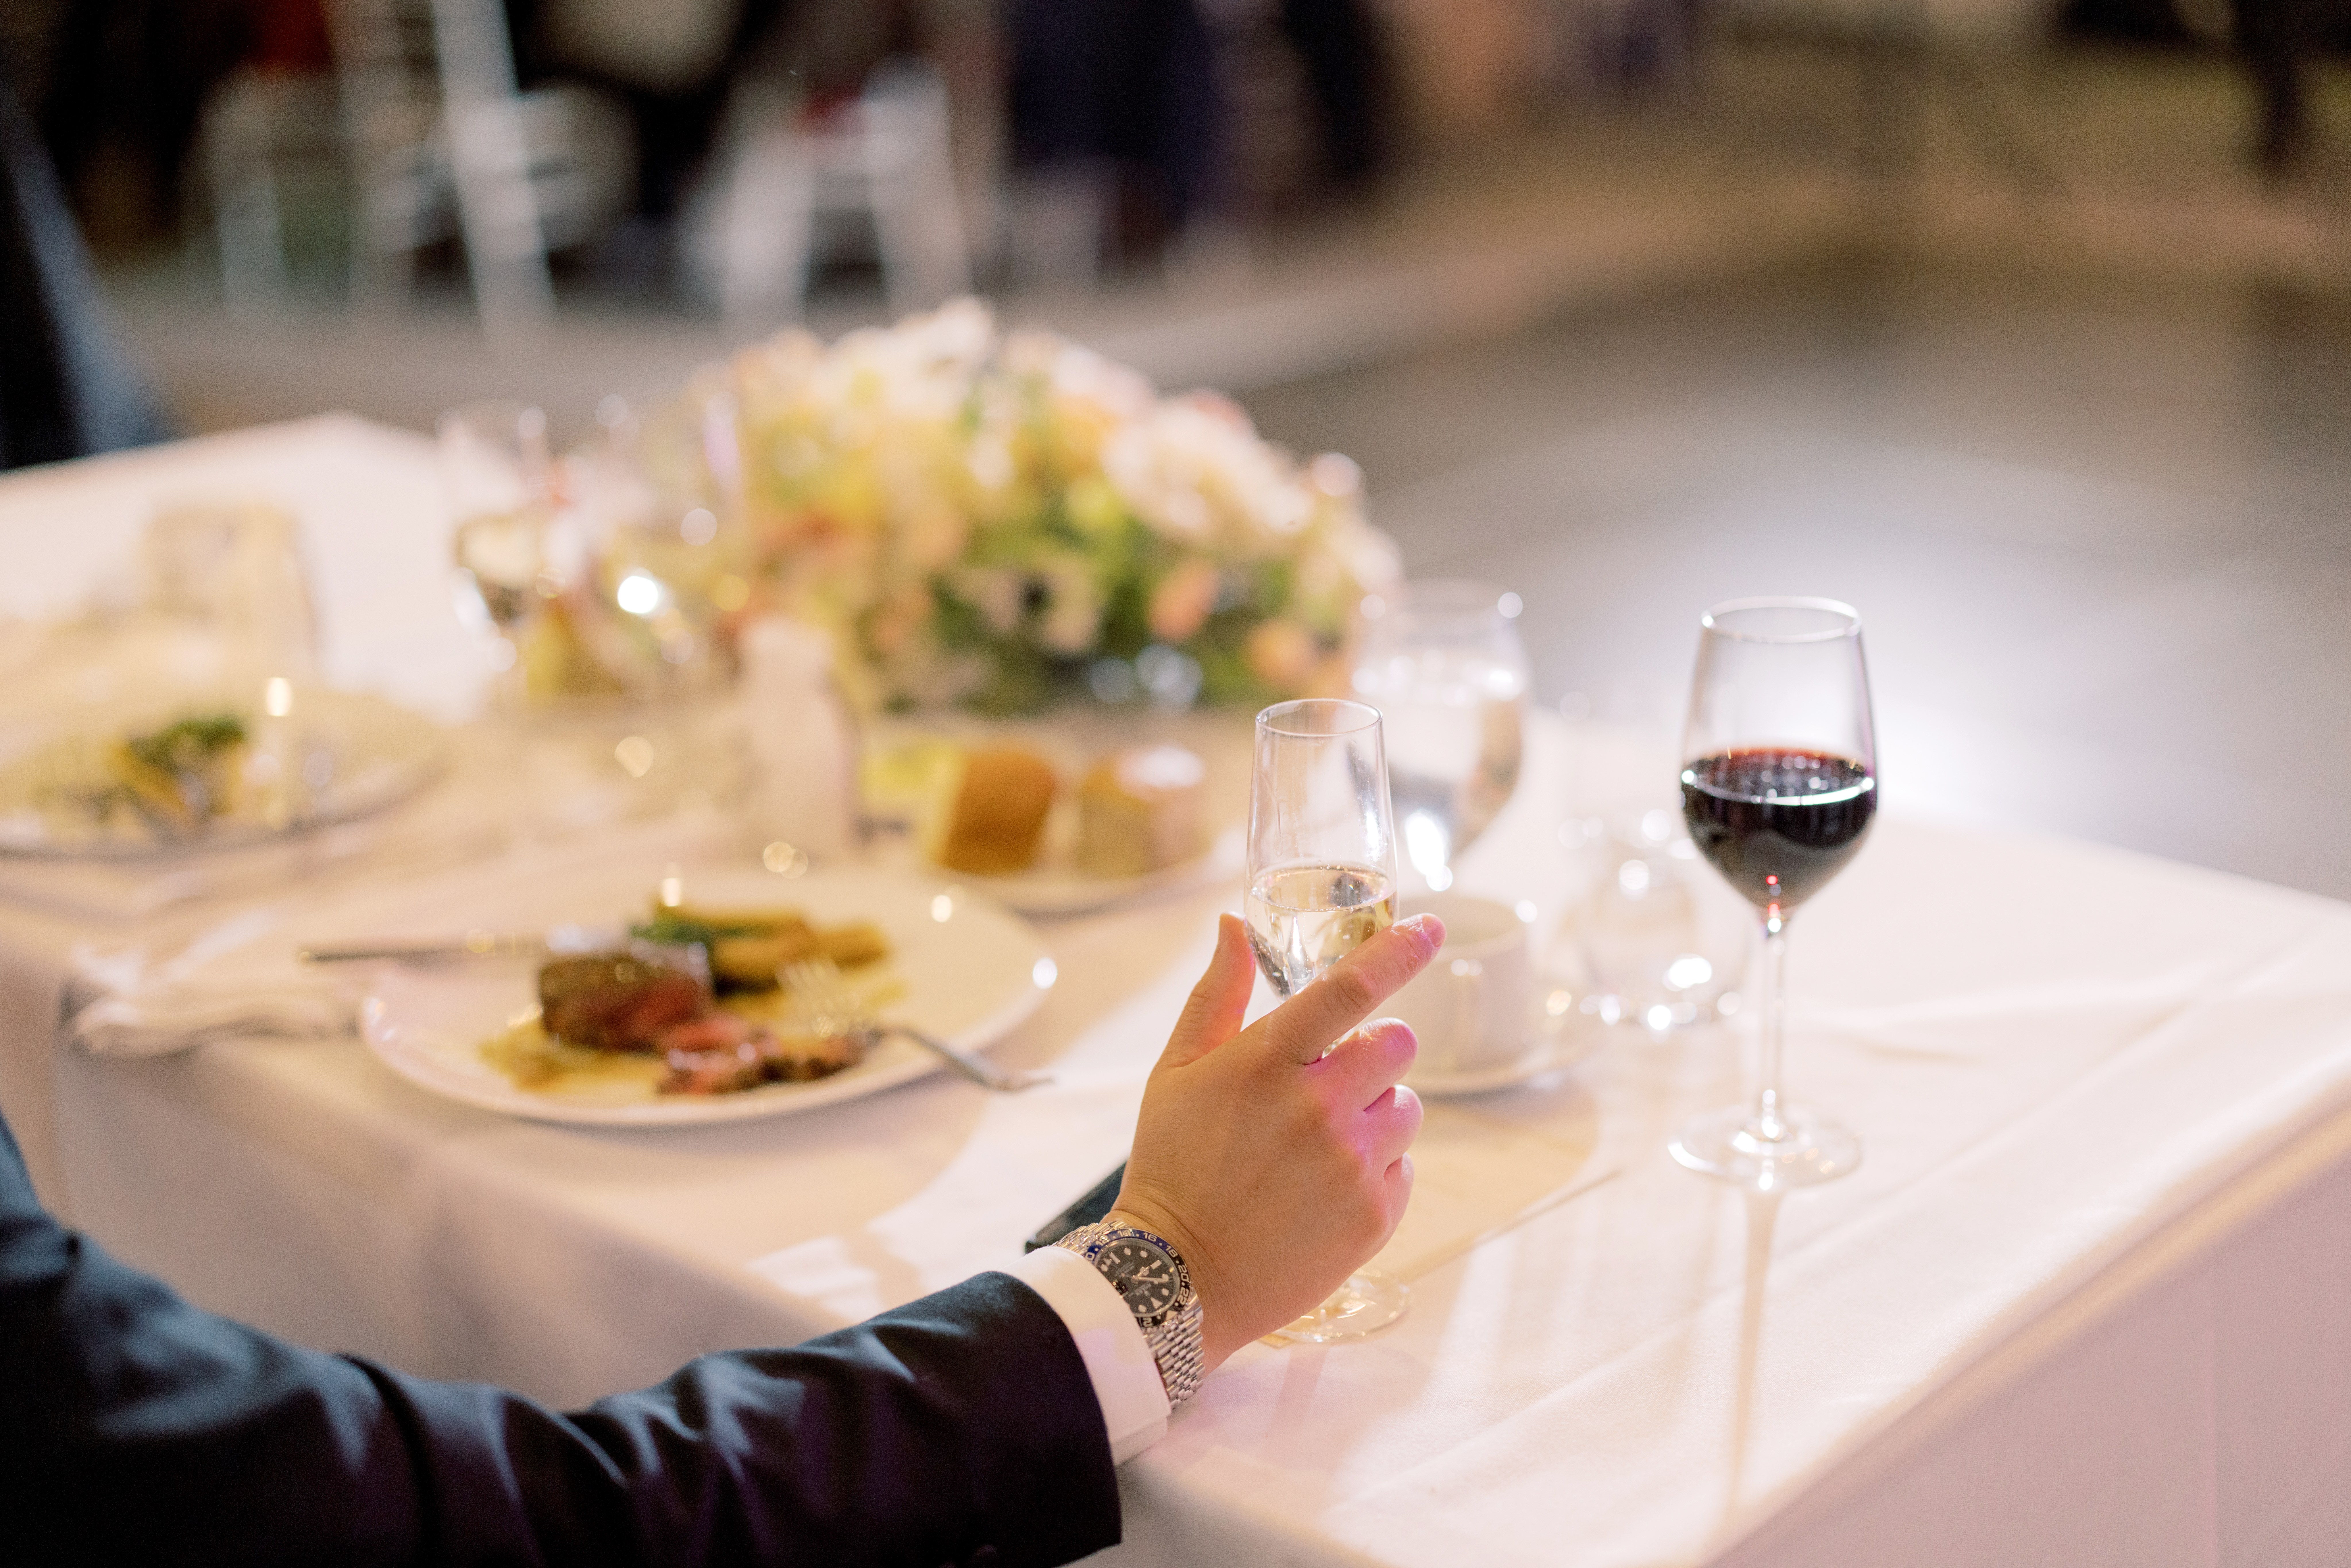 Editorial image of the groom eating at the wedding reception. Image by Jenny Fu Studio